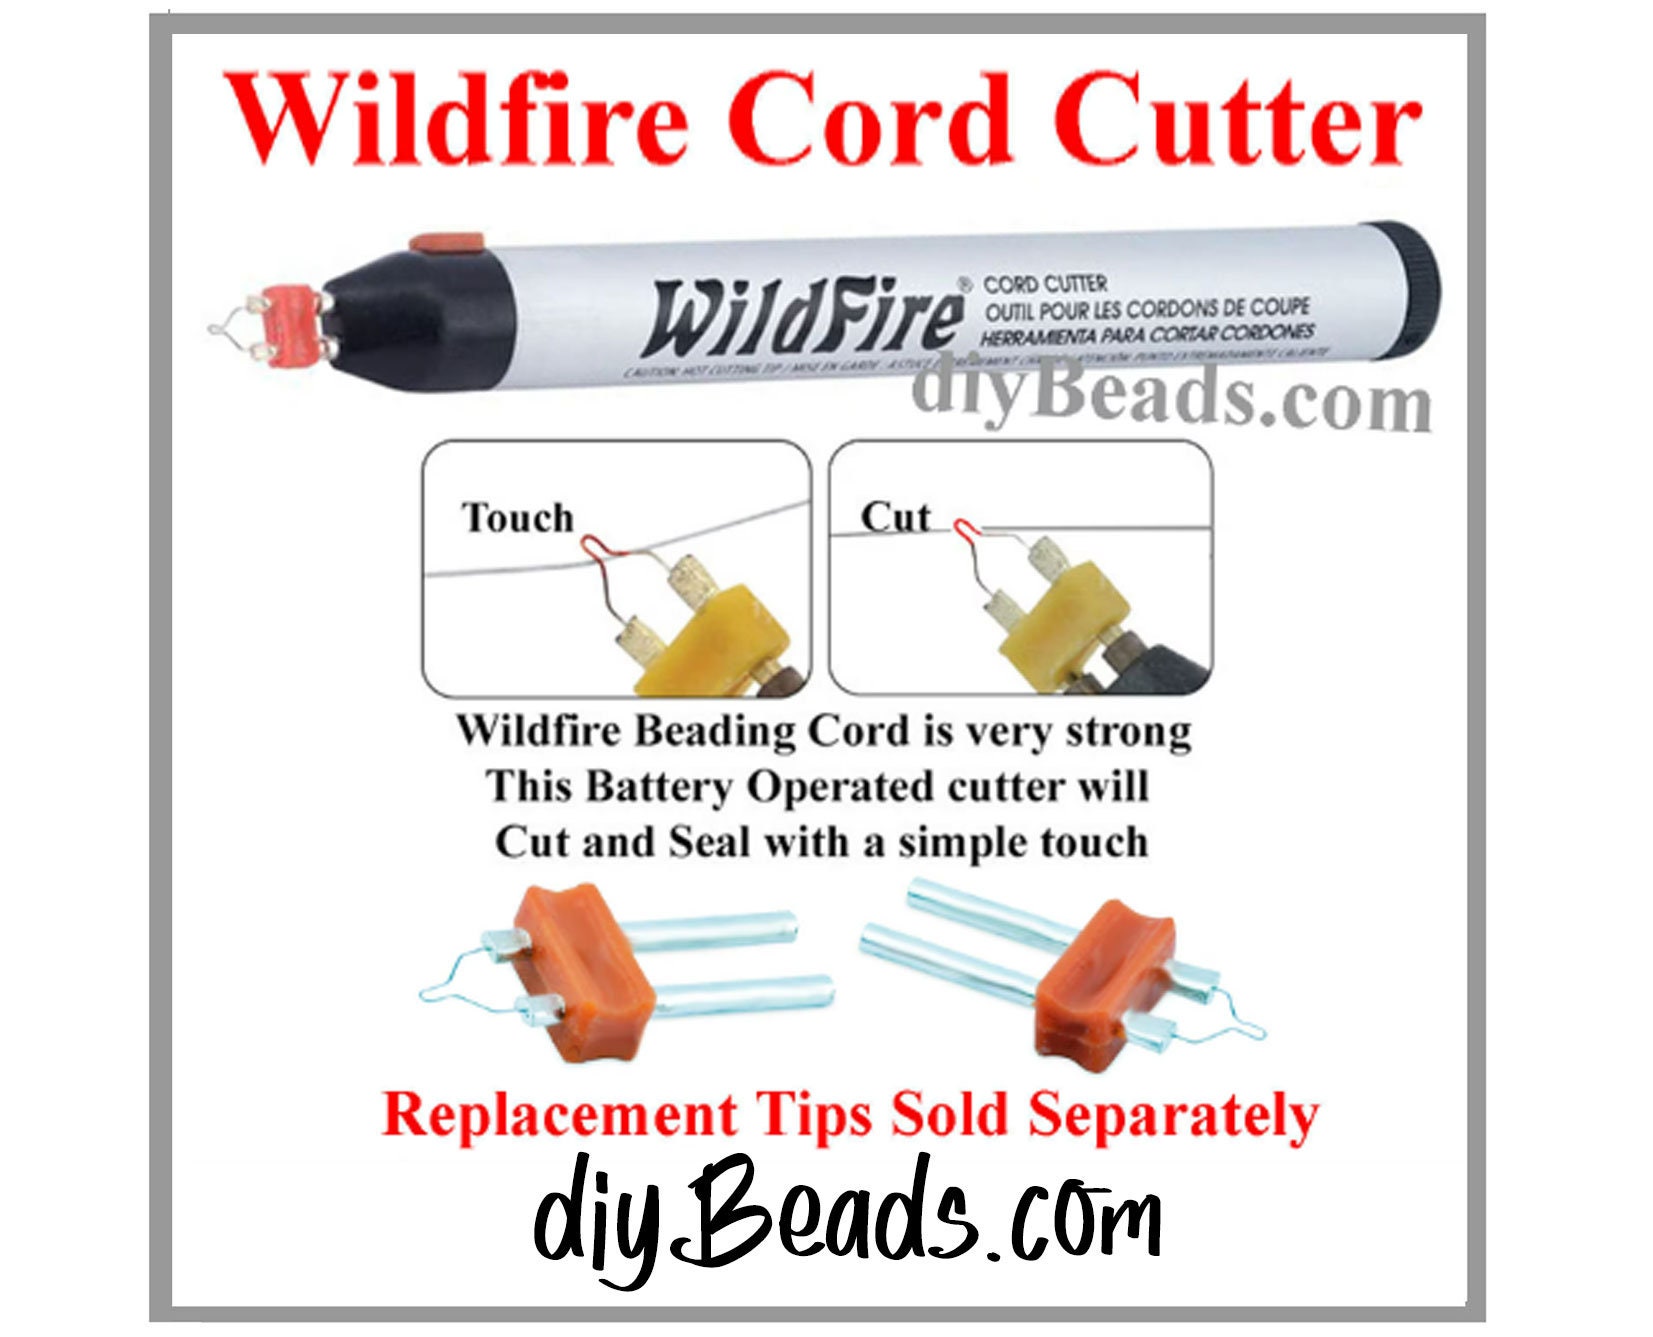 Use a Thread Burner to Cut and Seal Beading Thread